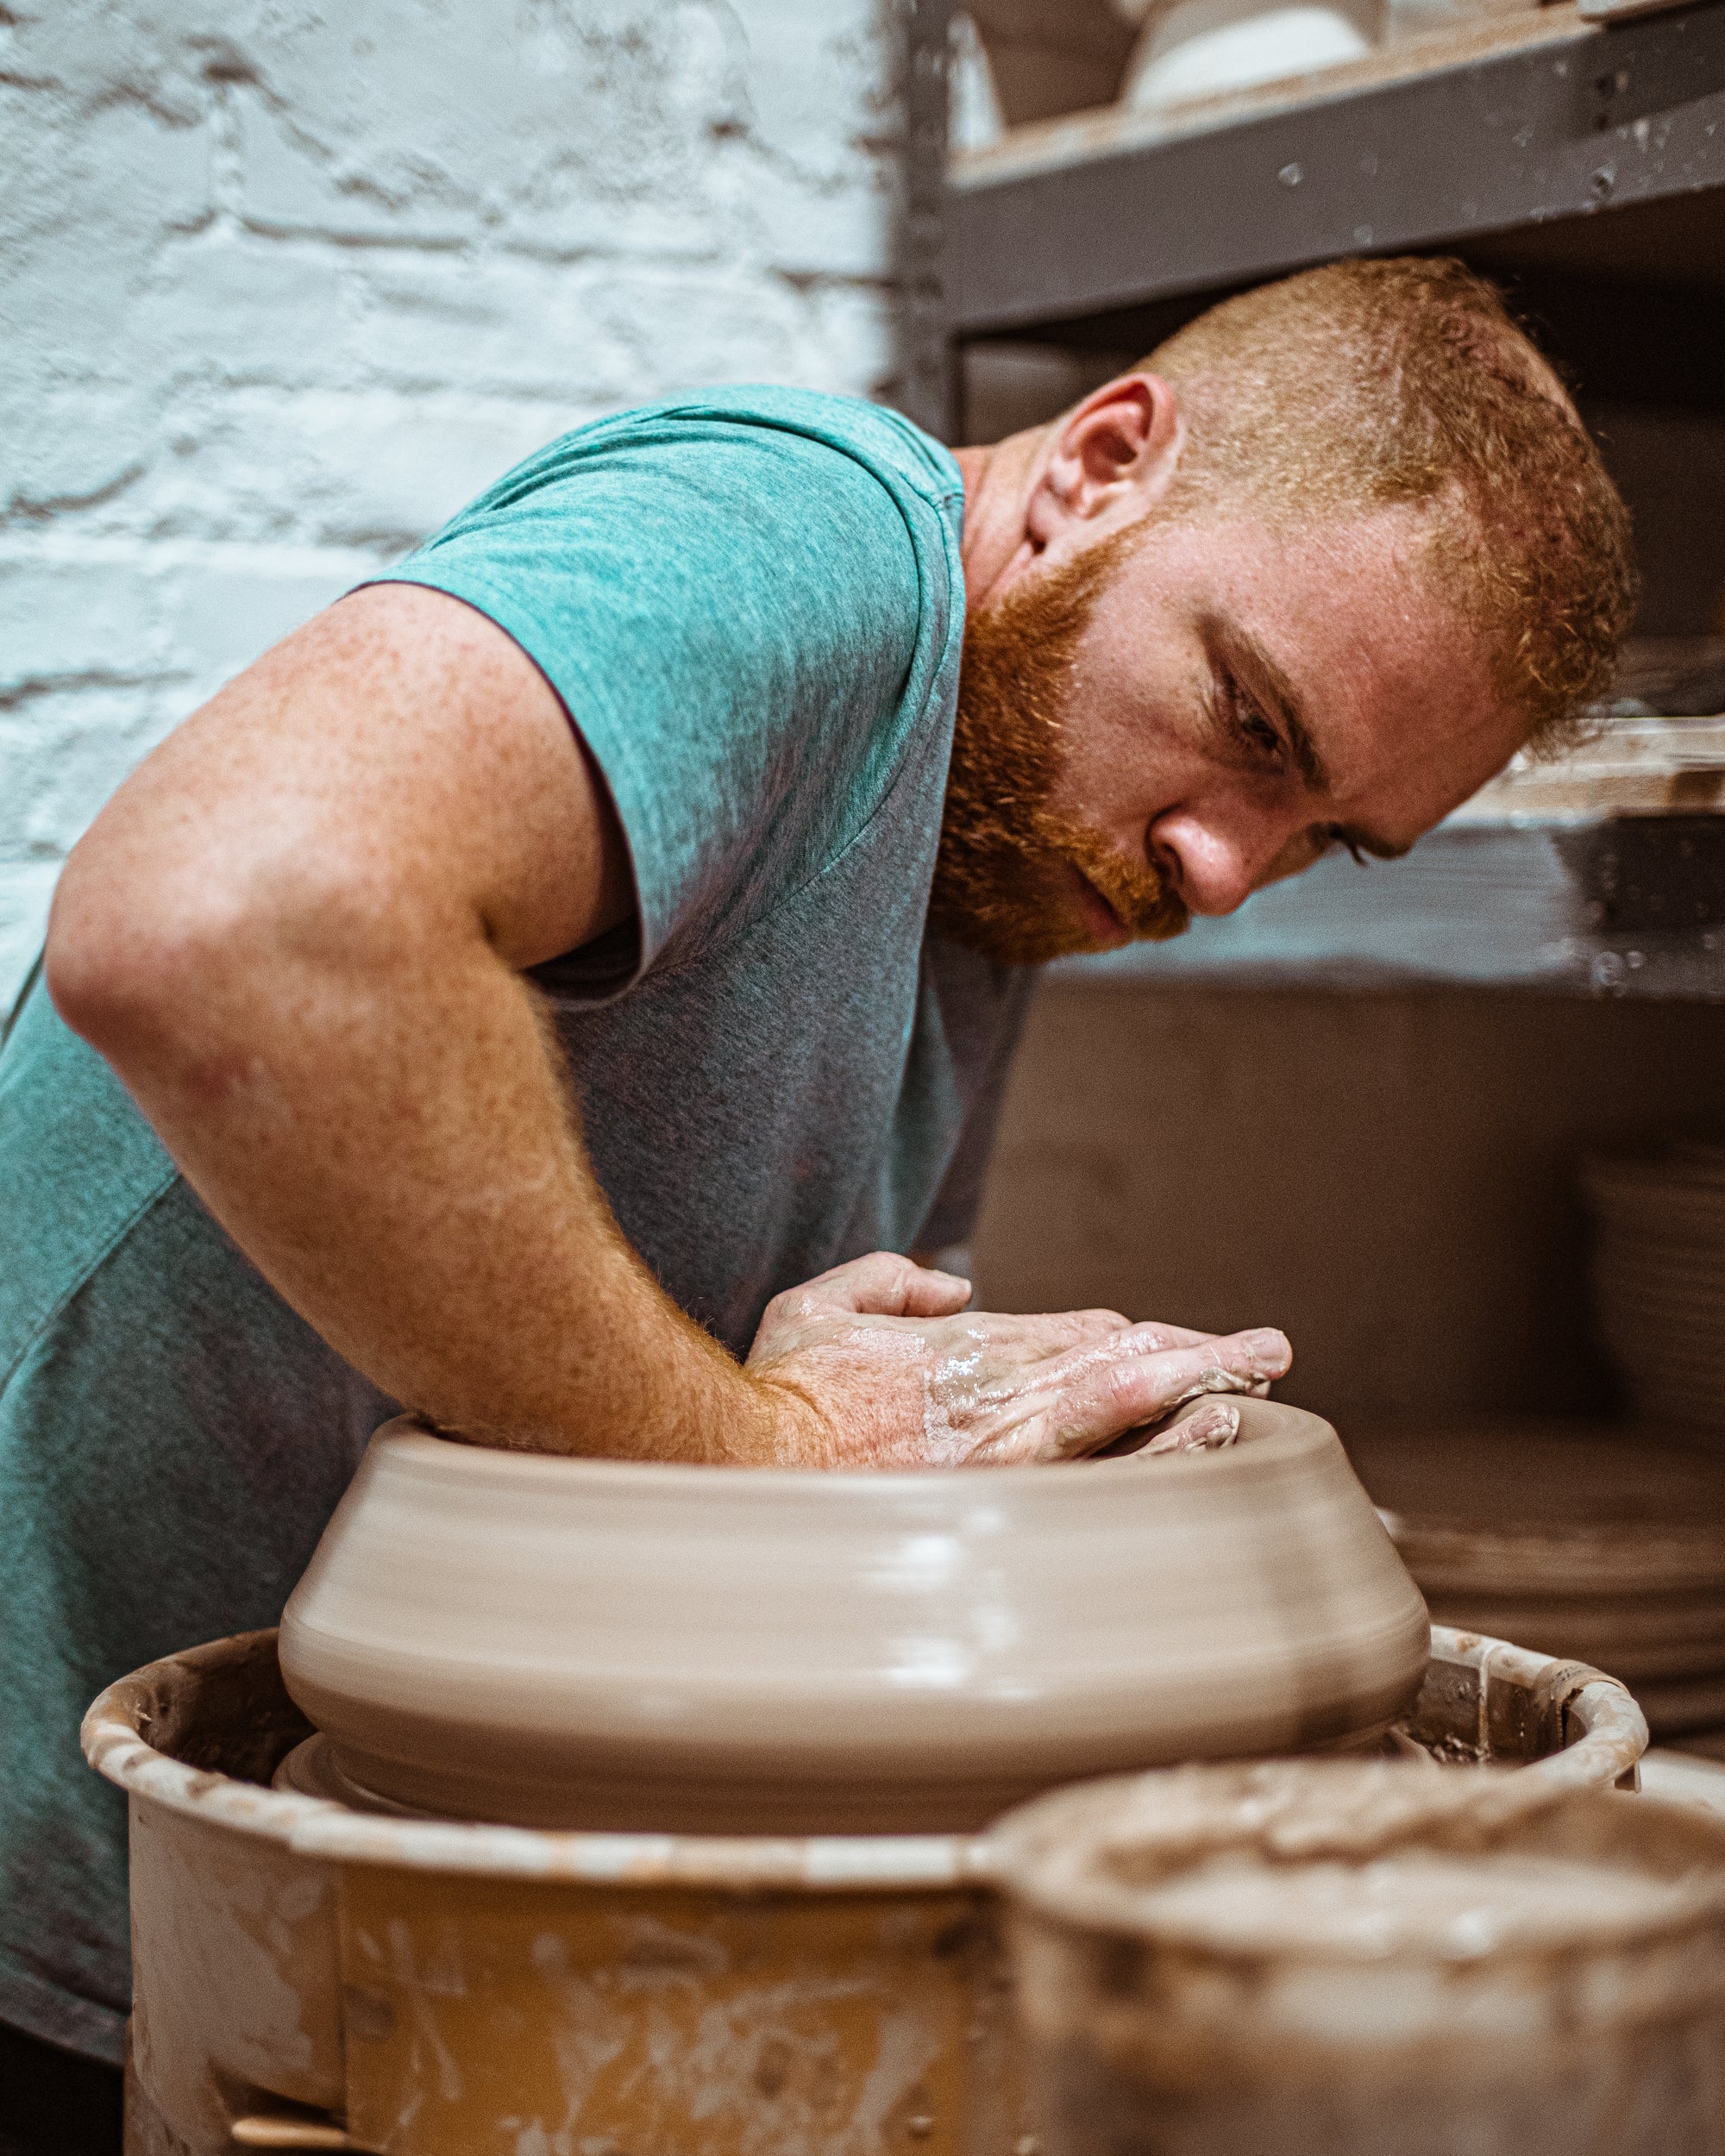 Connor McGinn Studios_For the Restaurant and the Home_Artist and Artisan_Handcrafted Ceramics_Non-Toxic Materials_Master Craftsman 